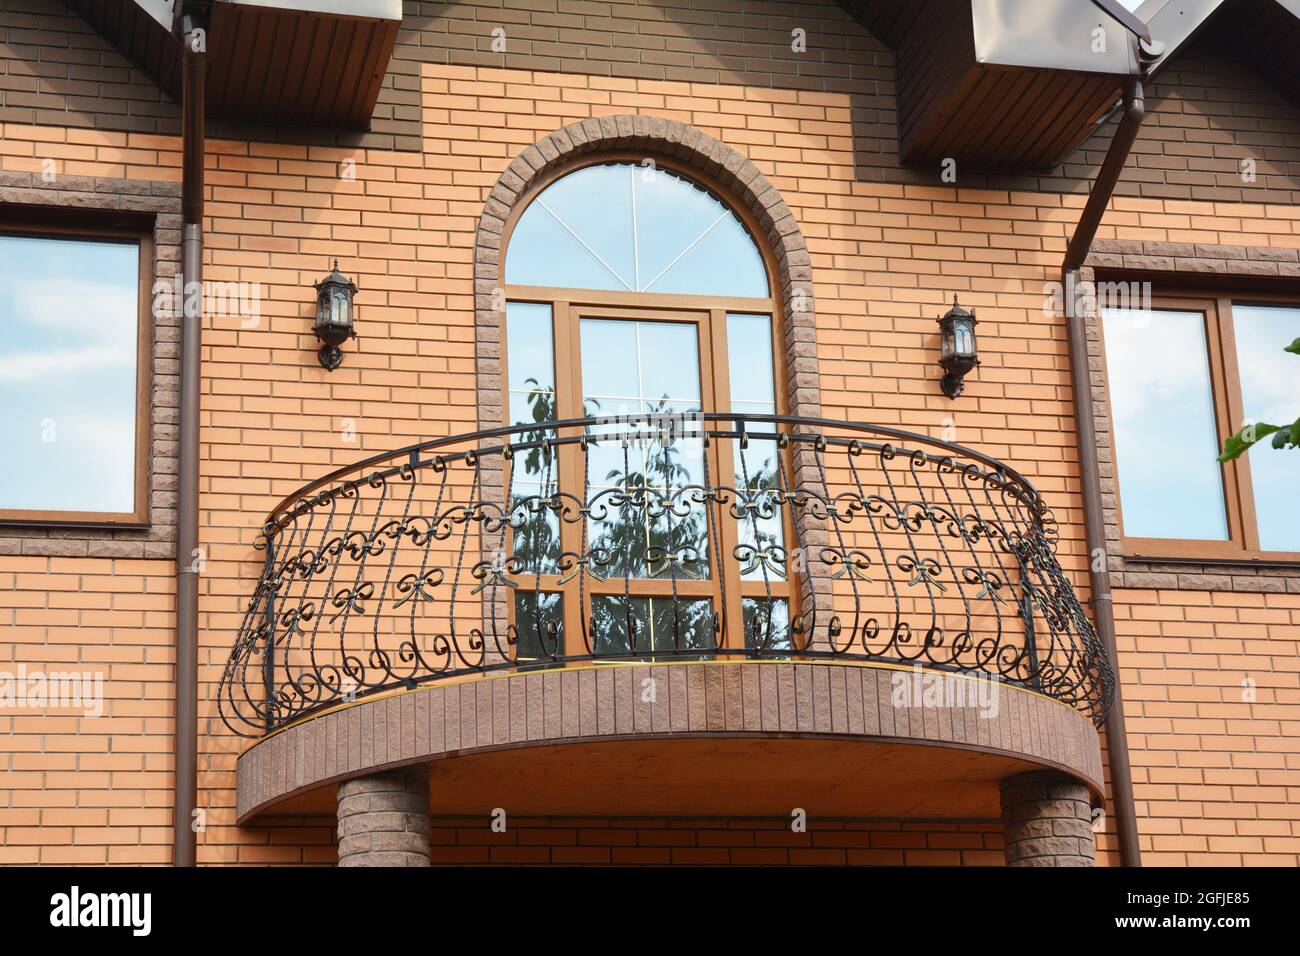 A close-up on semi-circled balcony with wrought iron railings, arched glass door and roof gutter system with downpipes of a brick house. Stock Photo